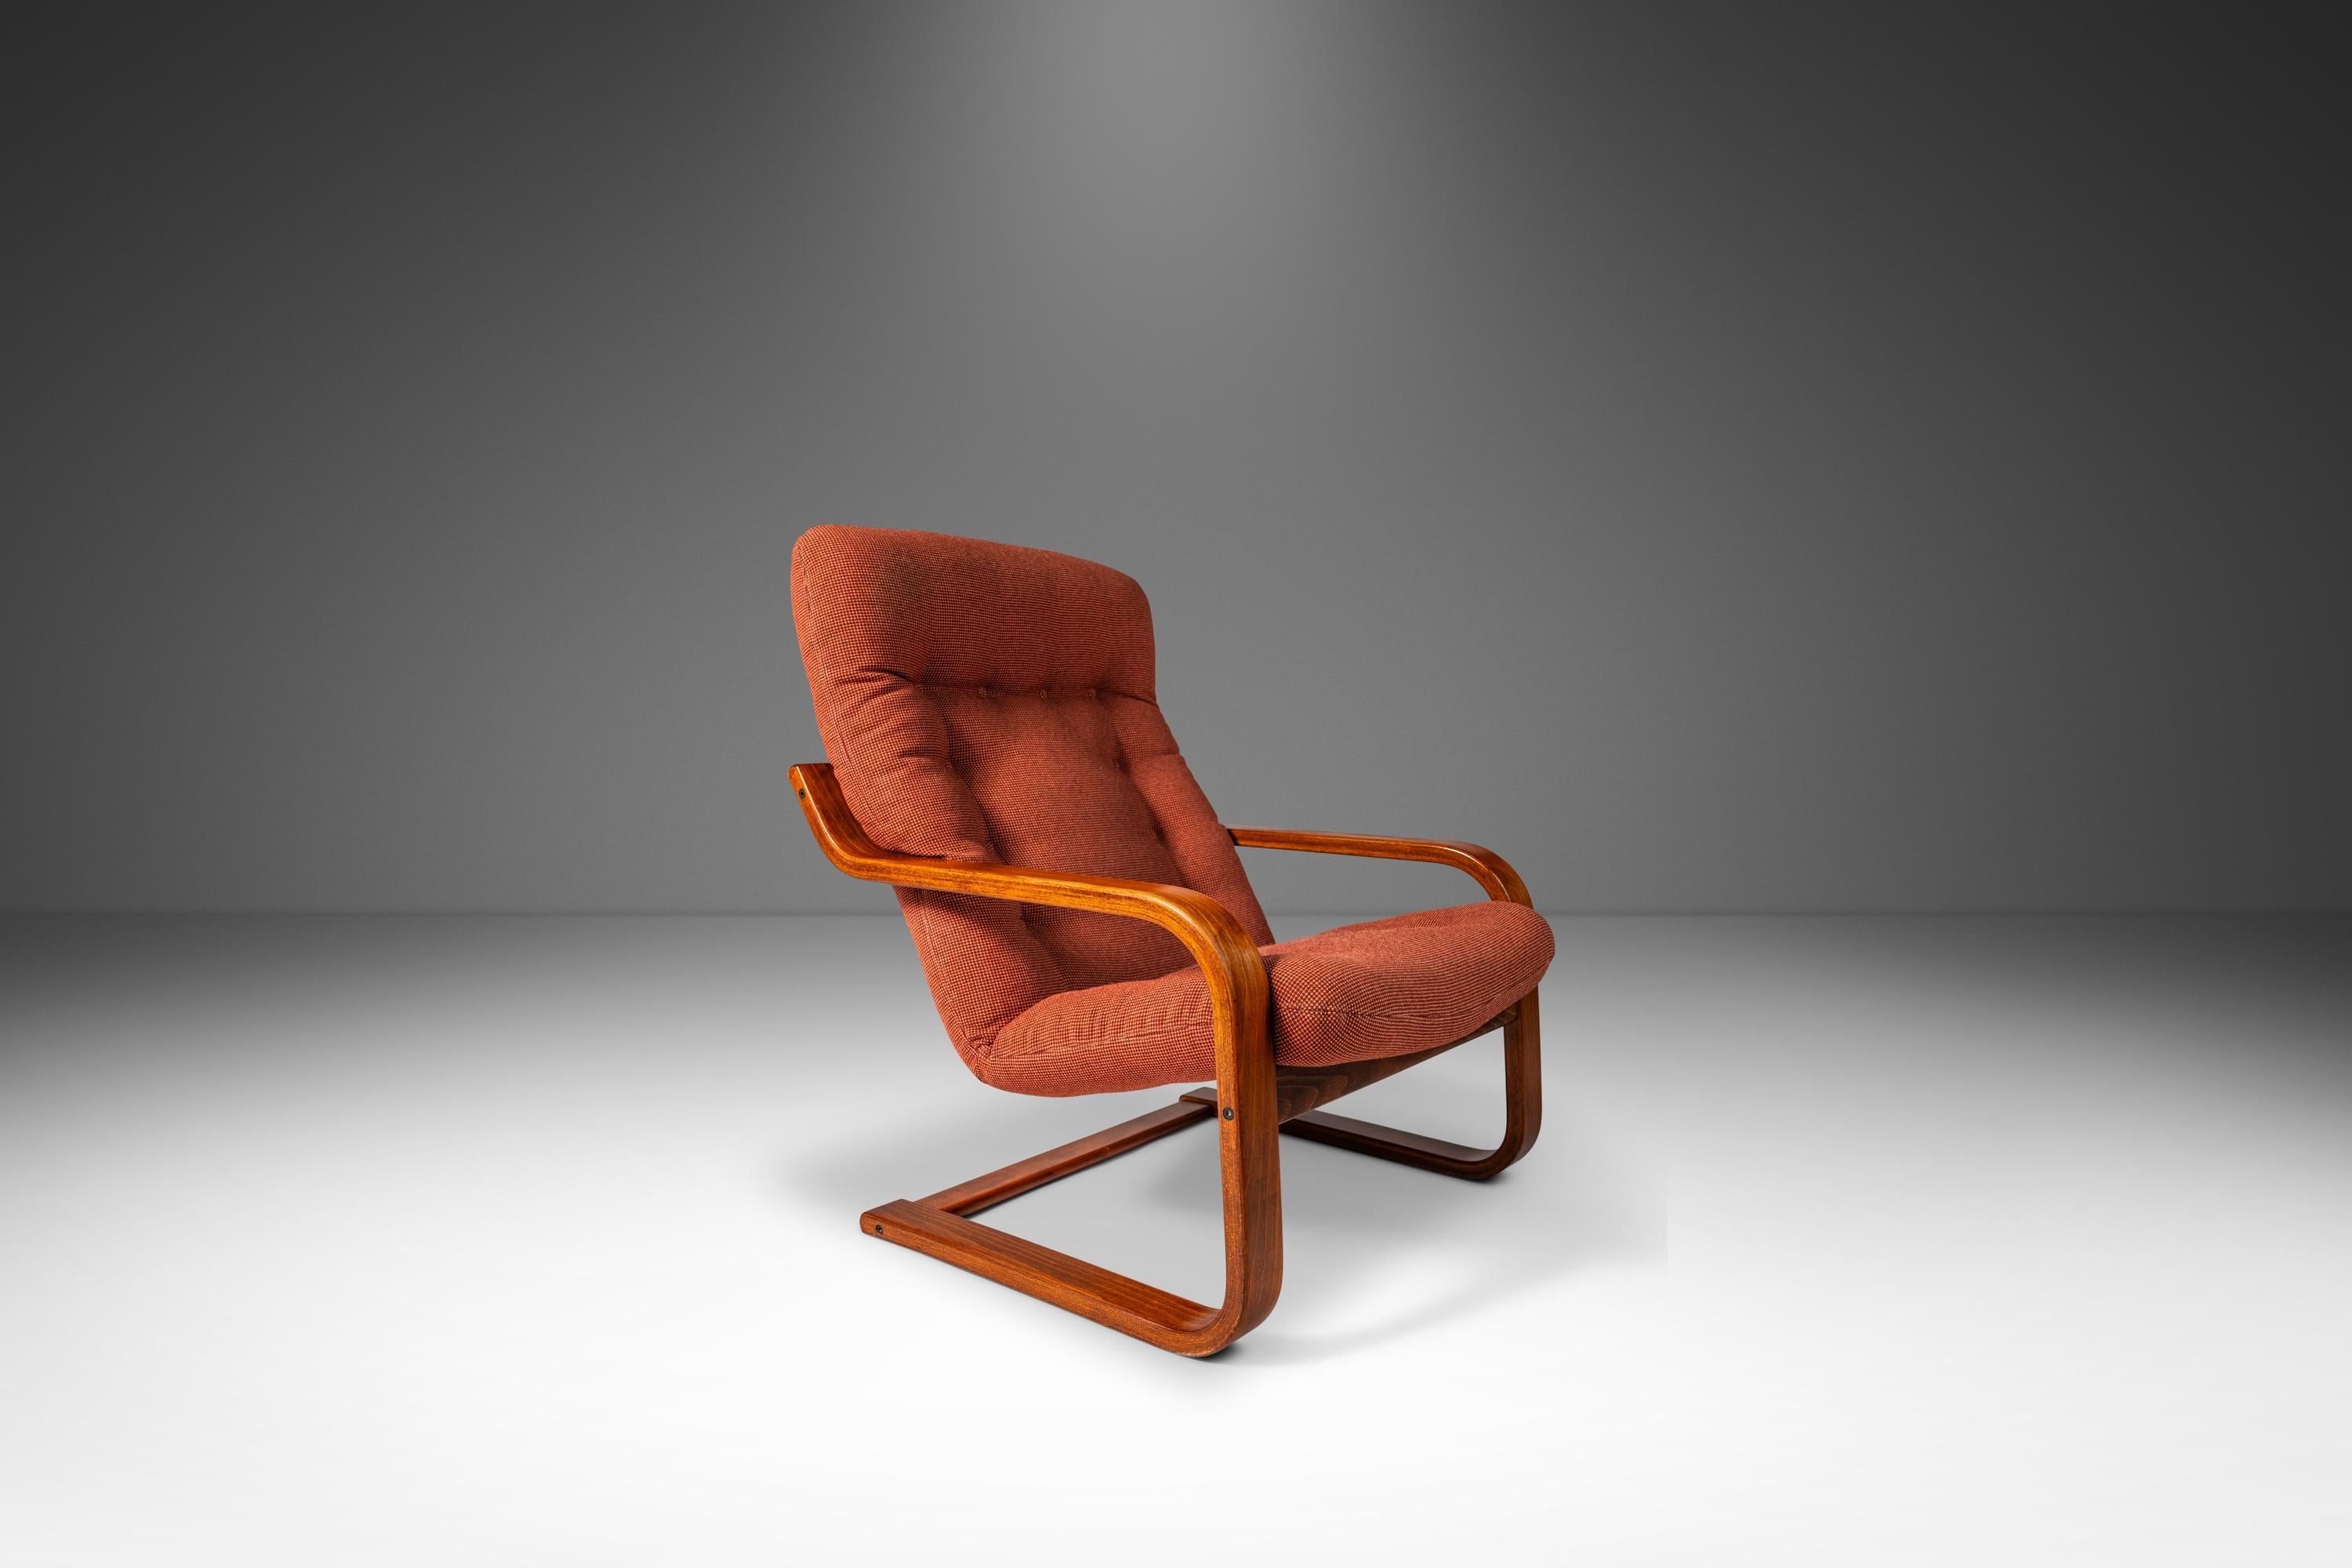 Mid-Century Modern Bentwood Lounge Chair in Beech and Original Fabric by Westnofa, Norway, c. 1970s